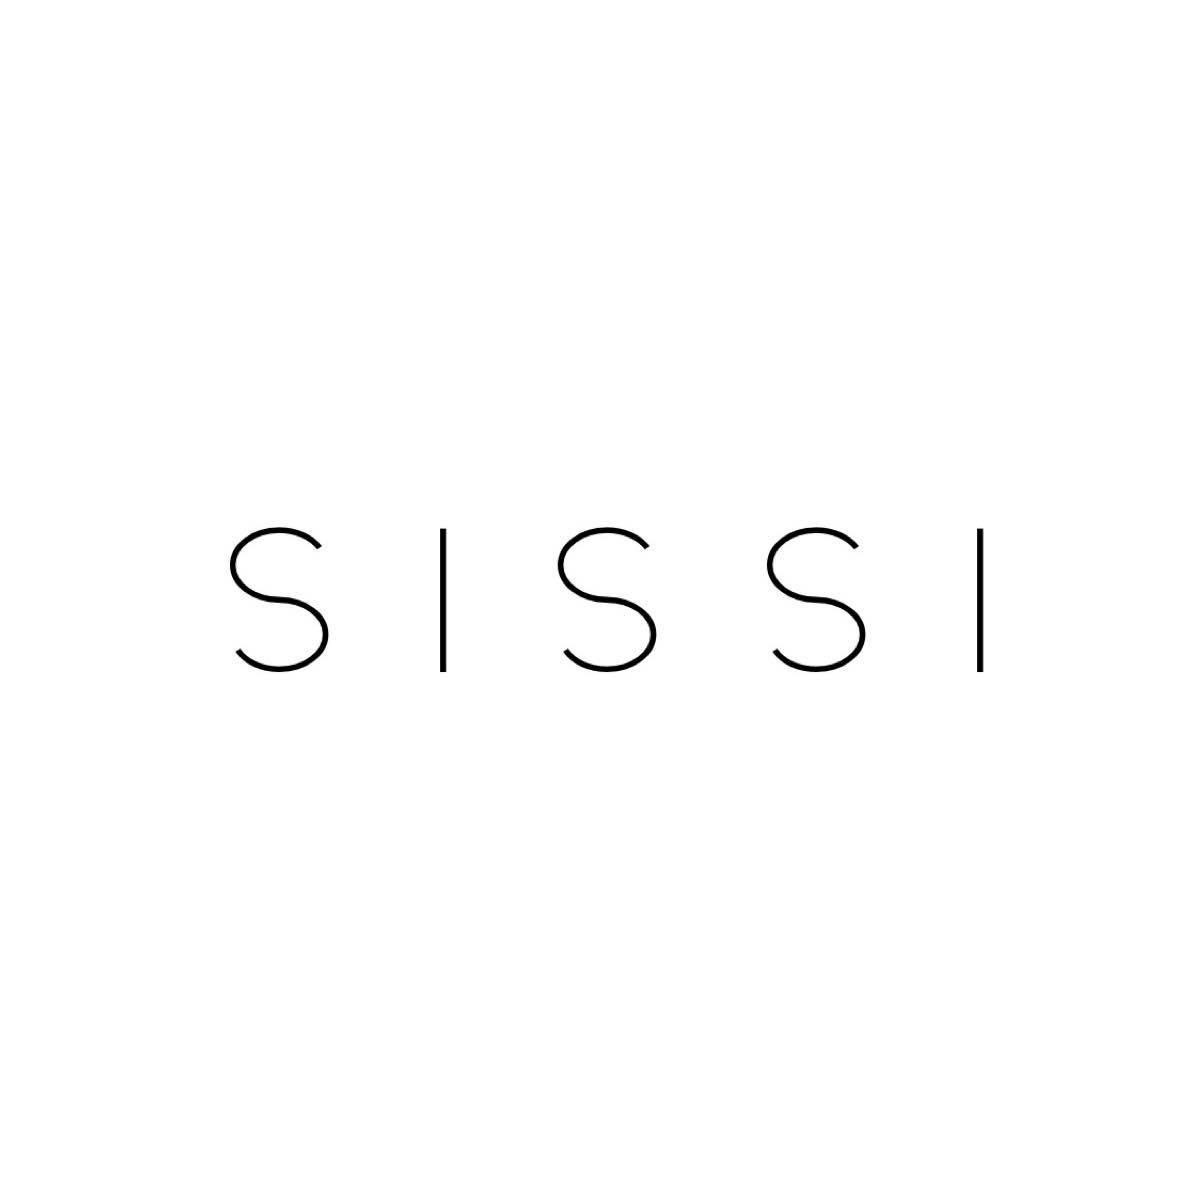 SISSI OFFICIAL